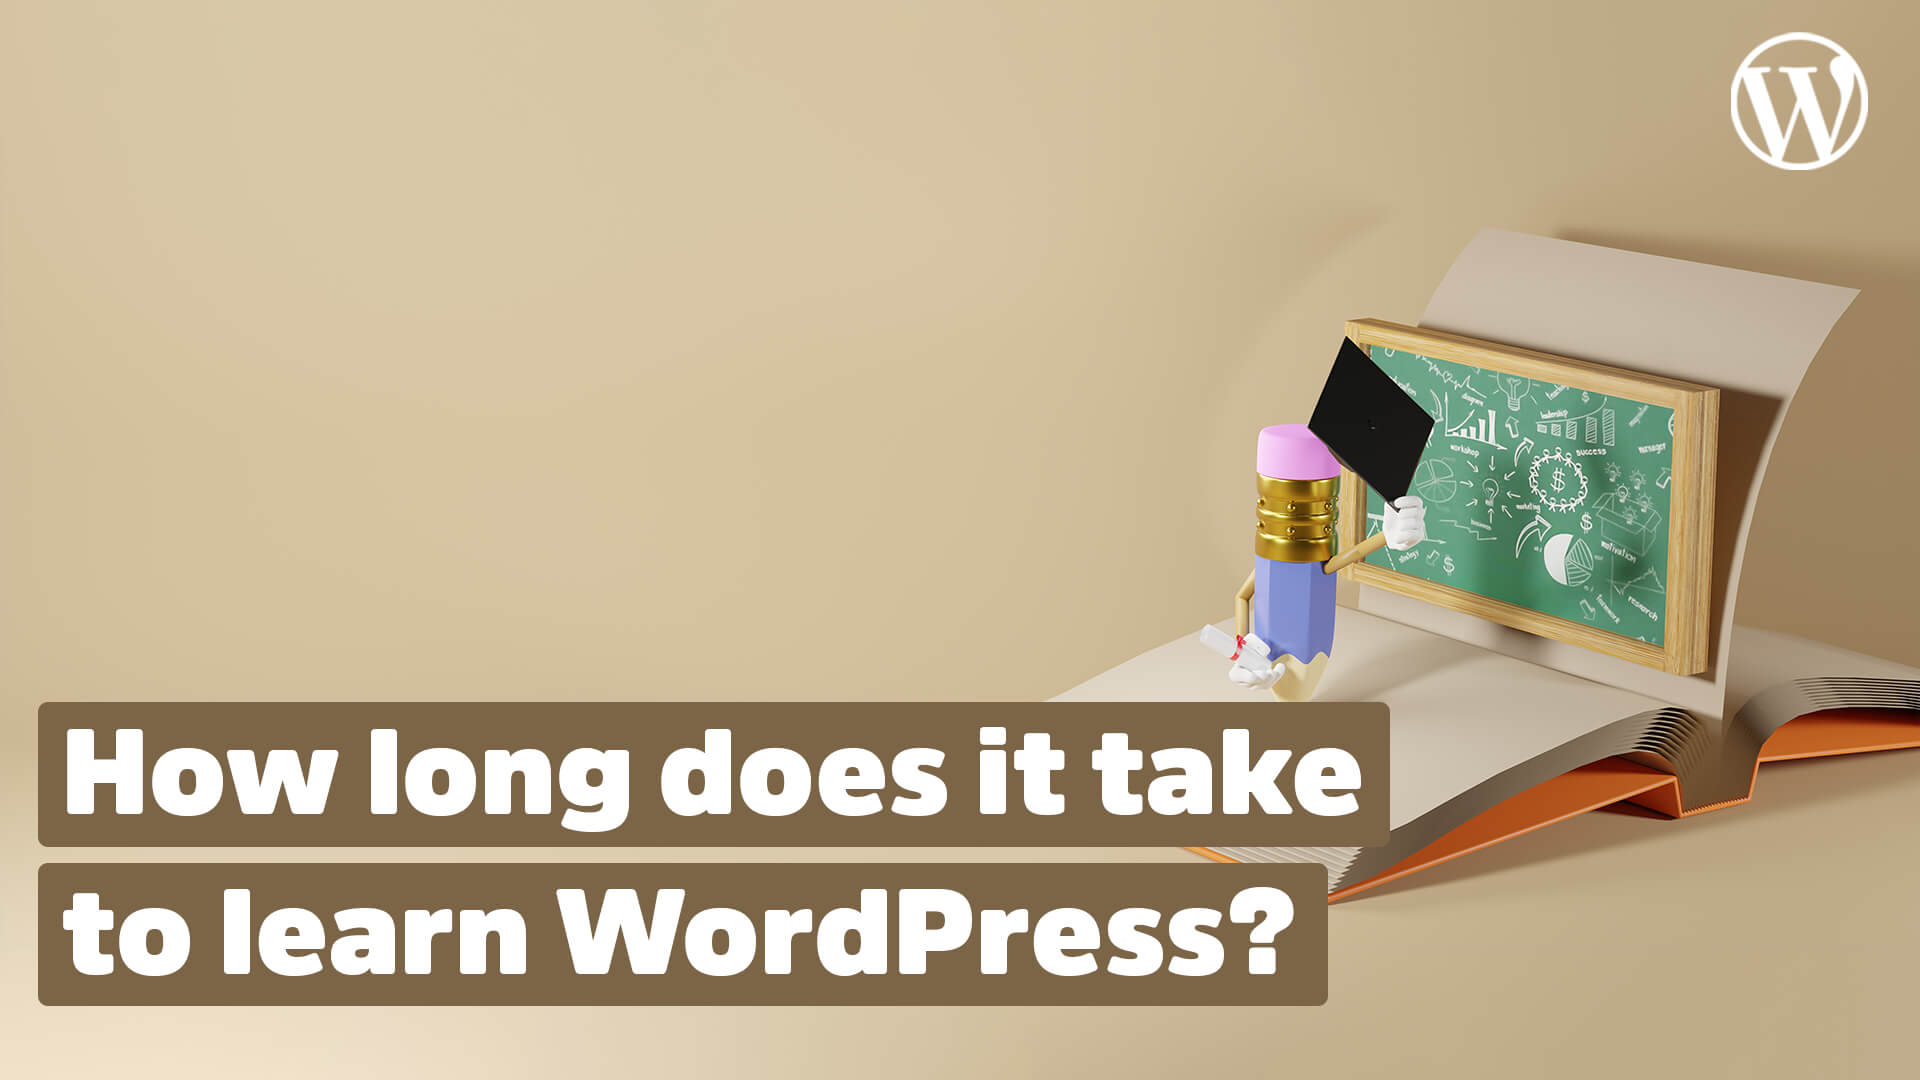 How long does it take to learn WordPress?